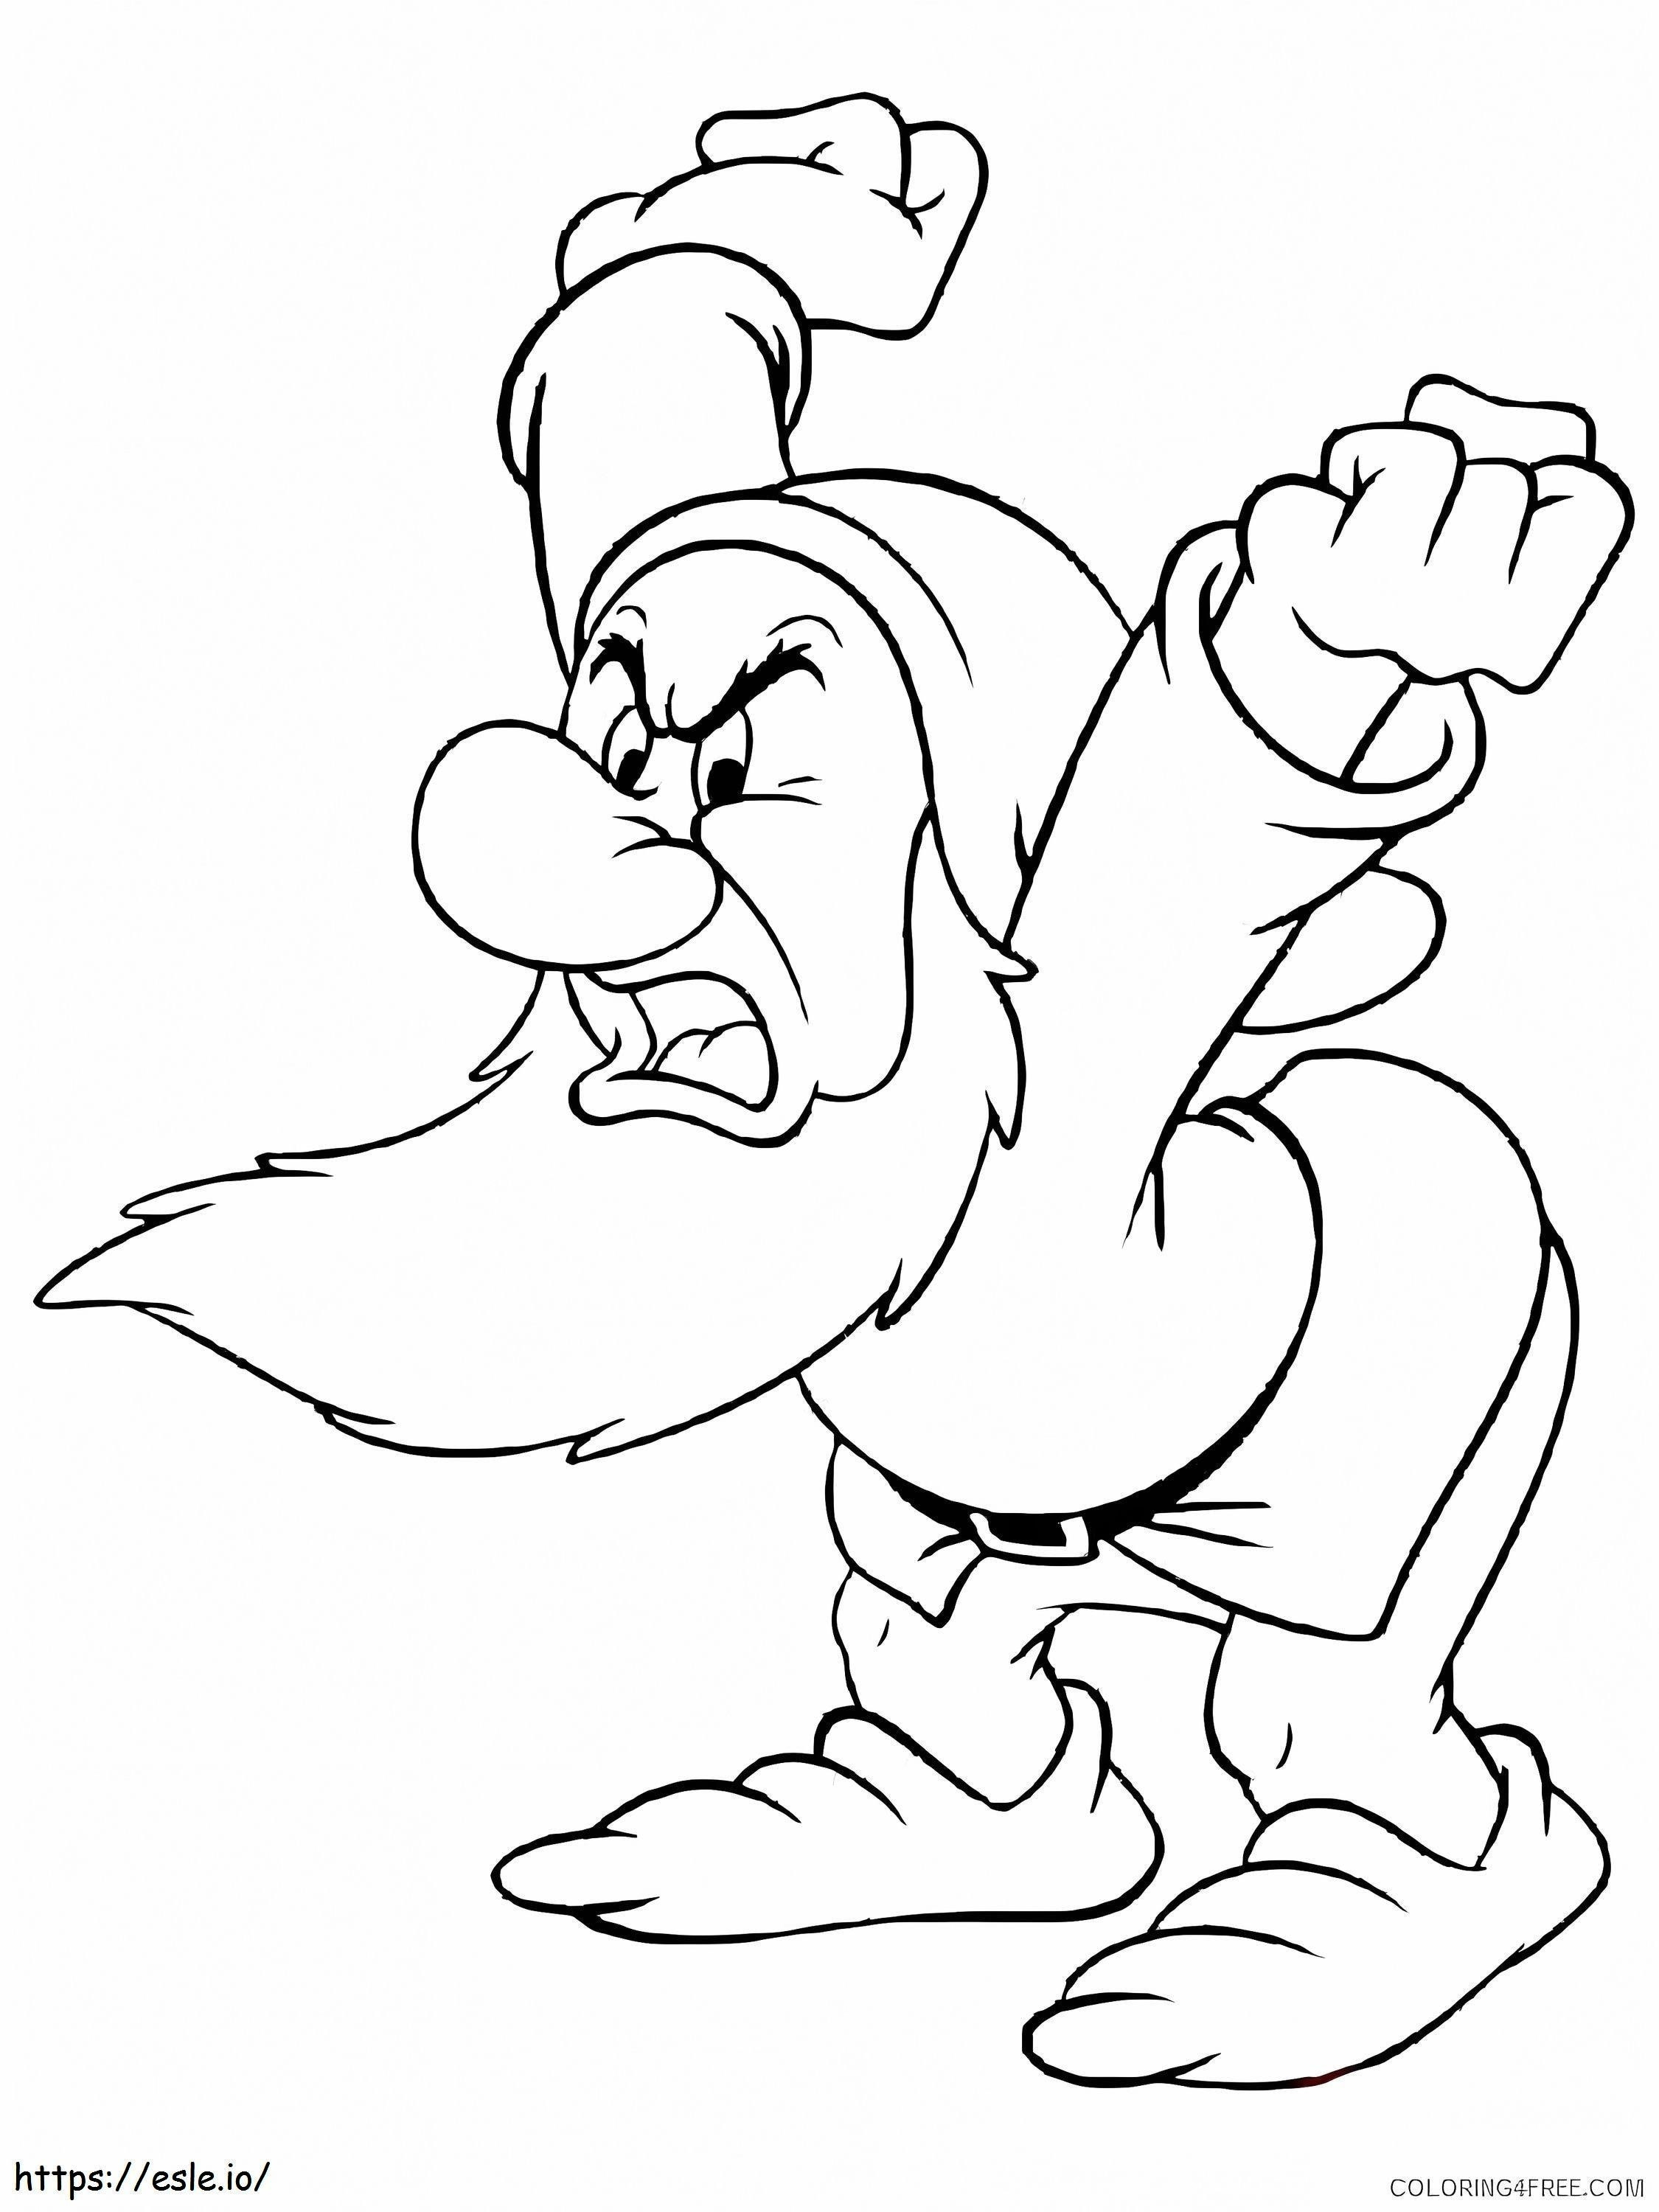 Angry Dwarf coloring page